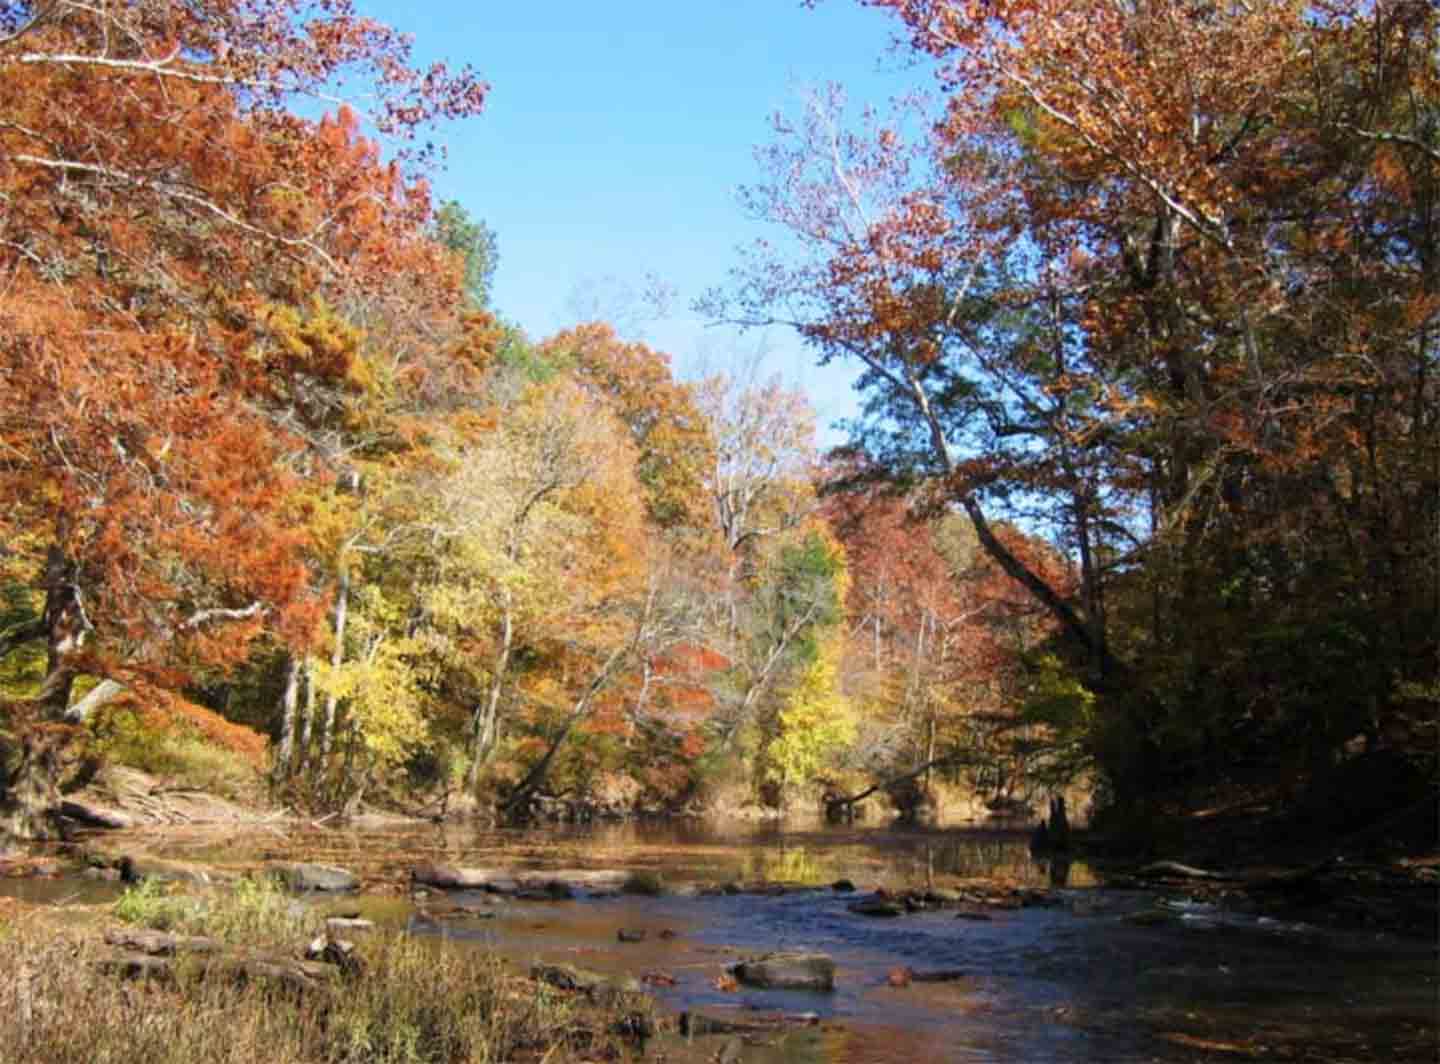 Photo of a river running through Tishomingo State Park